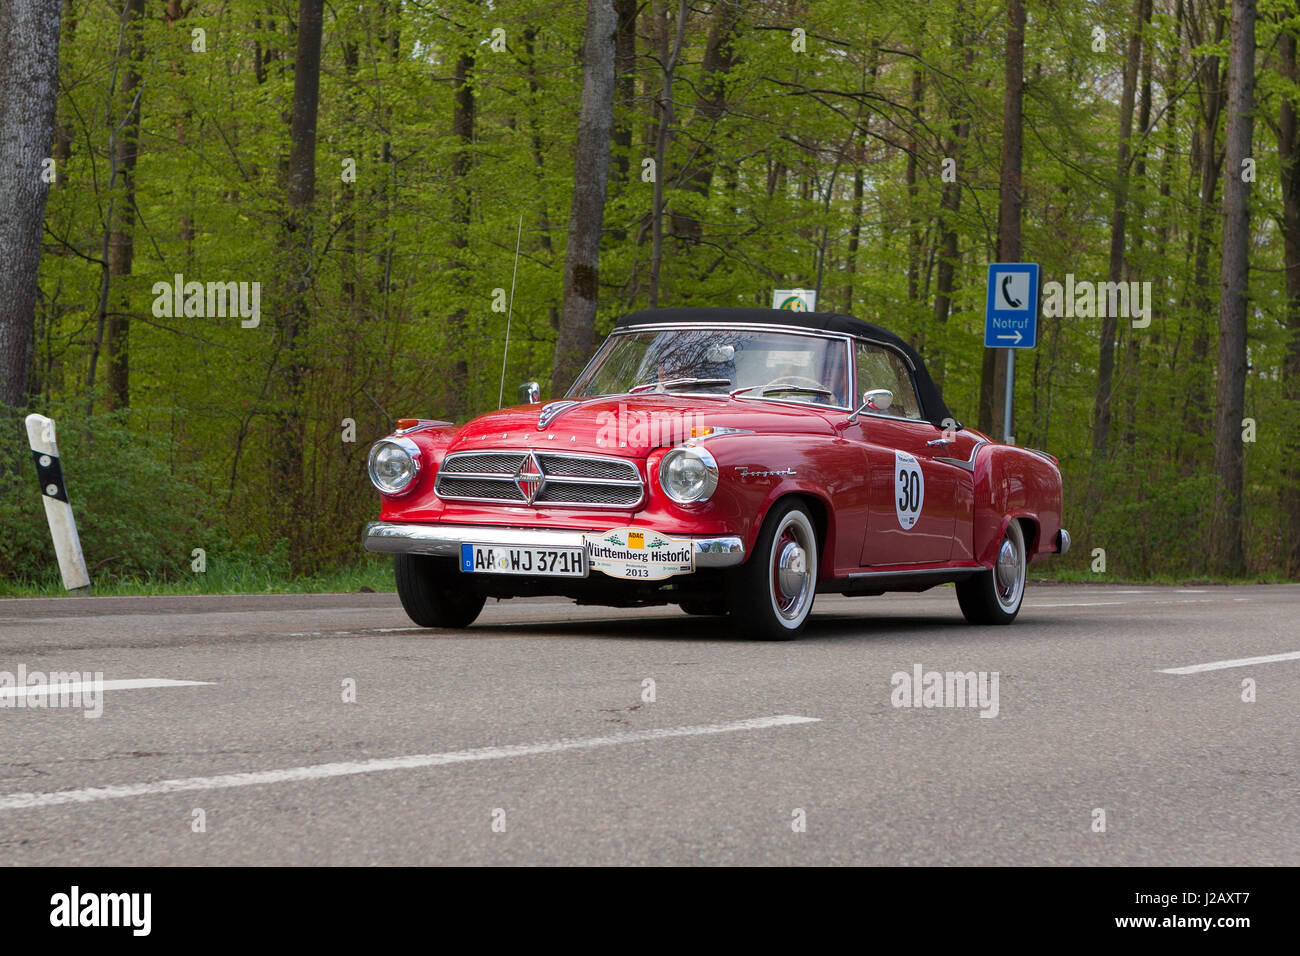 HEIDENHEIM, GERMANY - MAY 4, 2013: Fritz Wohlfarth and Ulrich Frank in their 1959 Borgward Isabella Coupe Cabrio at the ADAC Wurttemberg Historic Rall Stock Photo